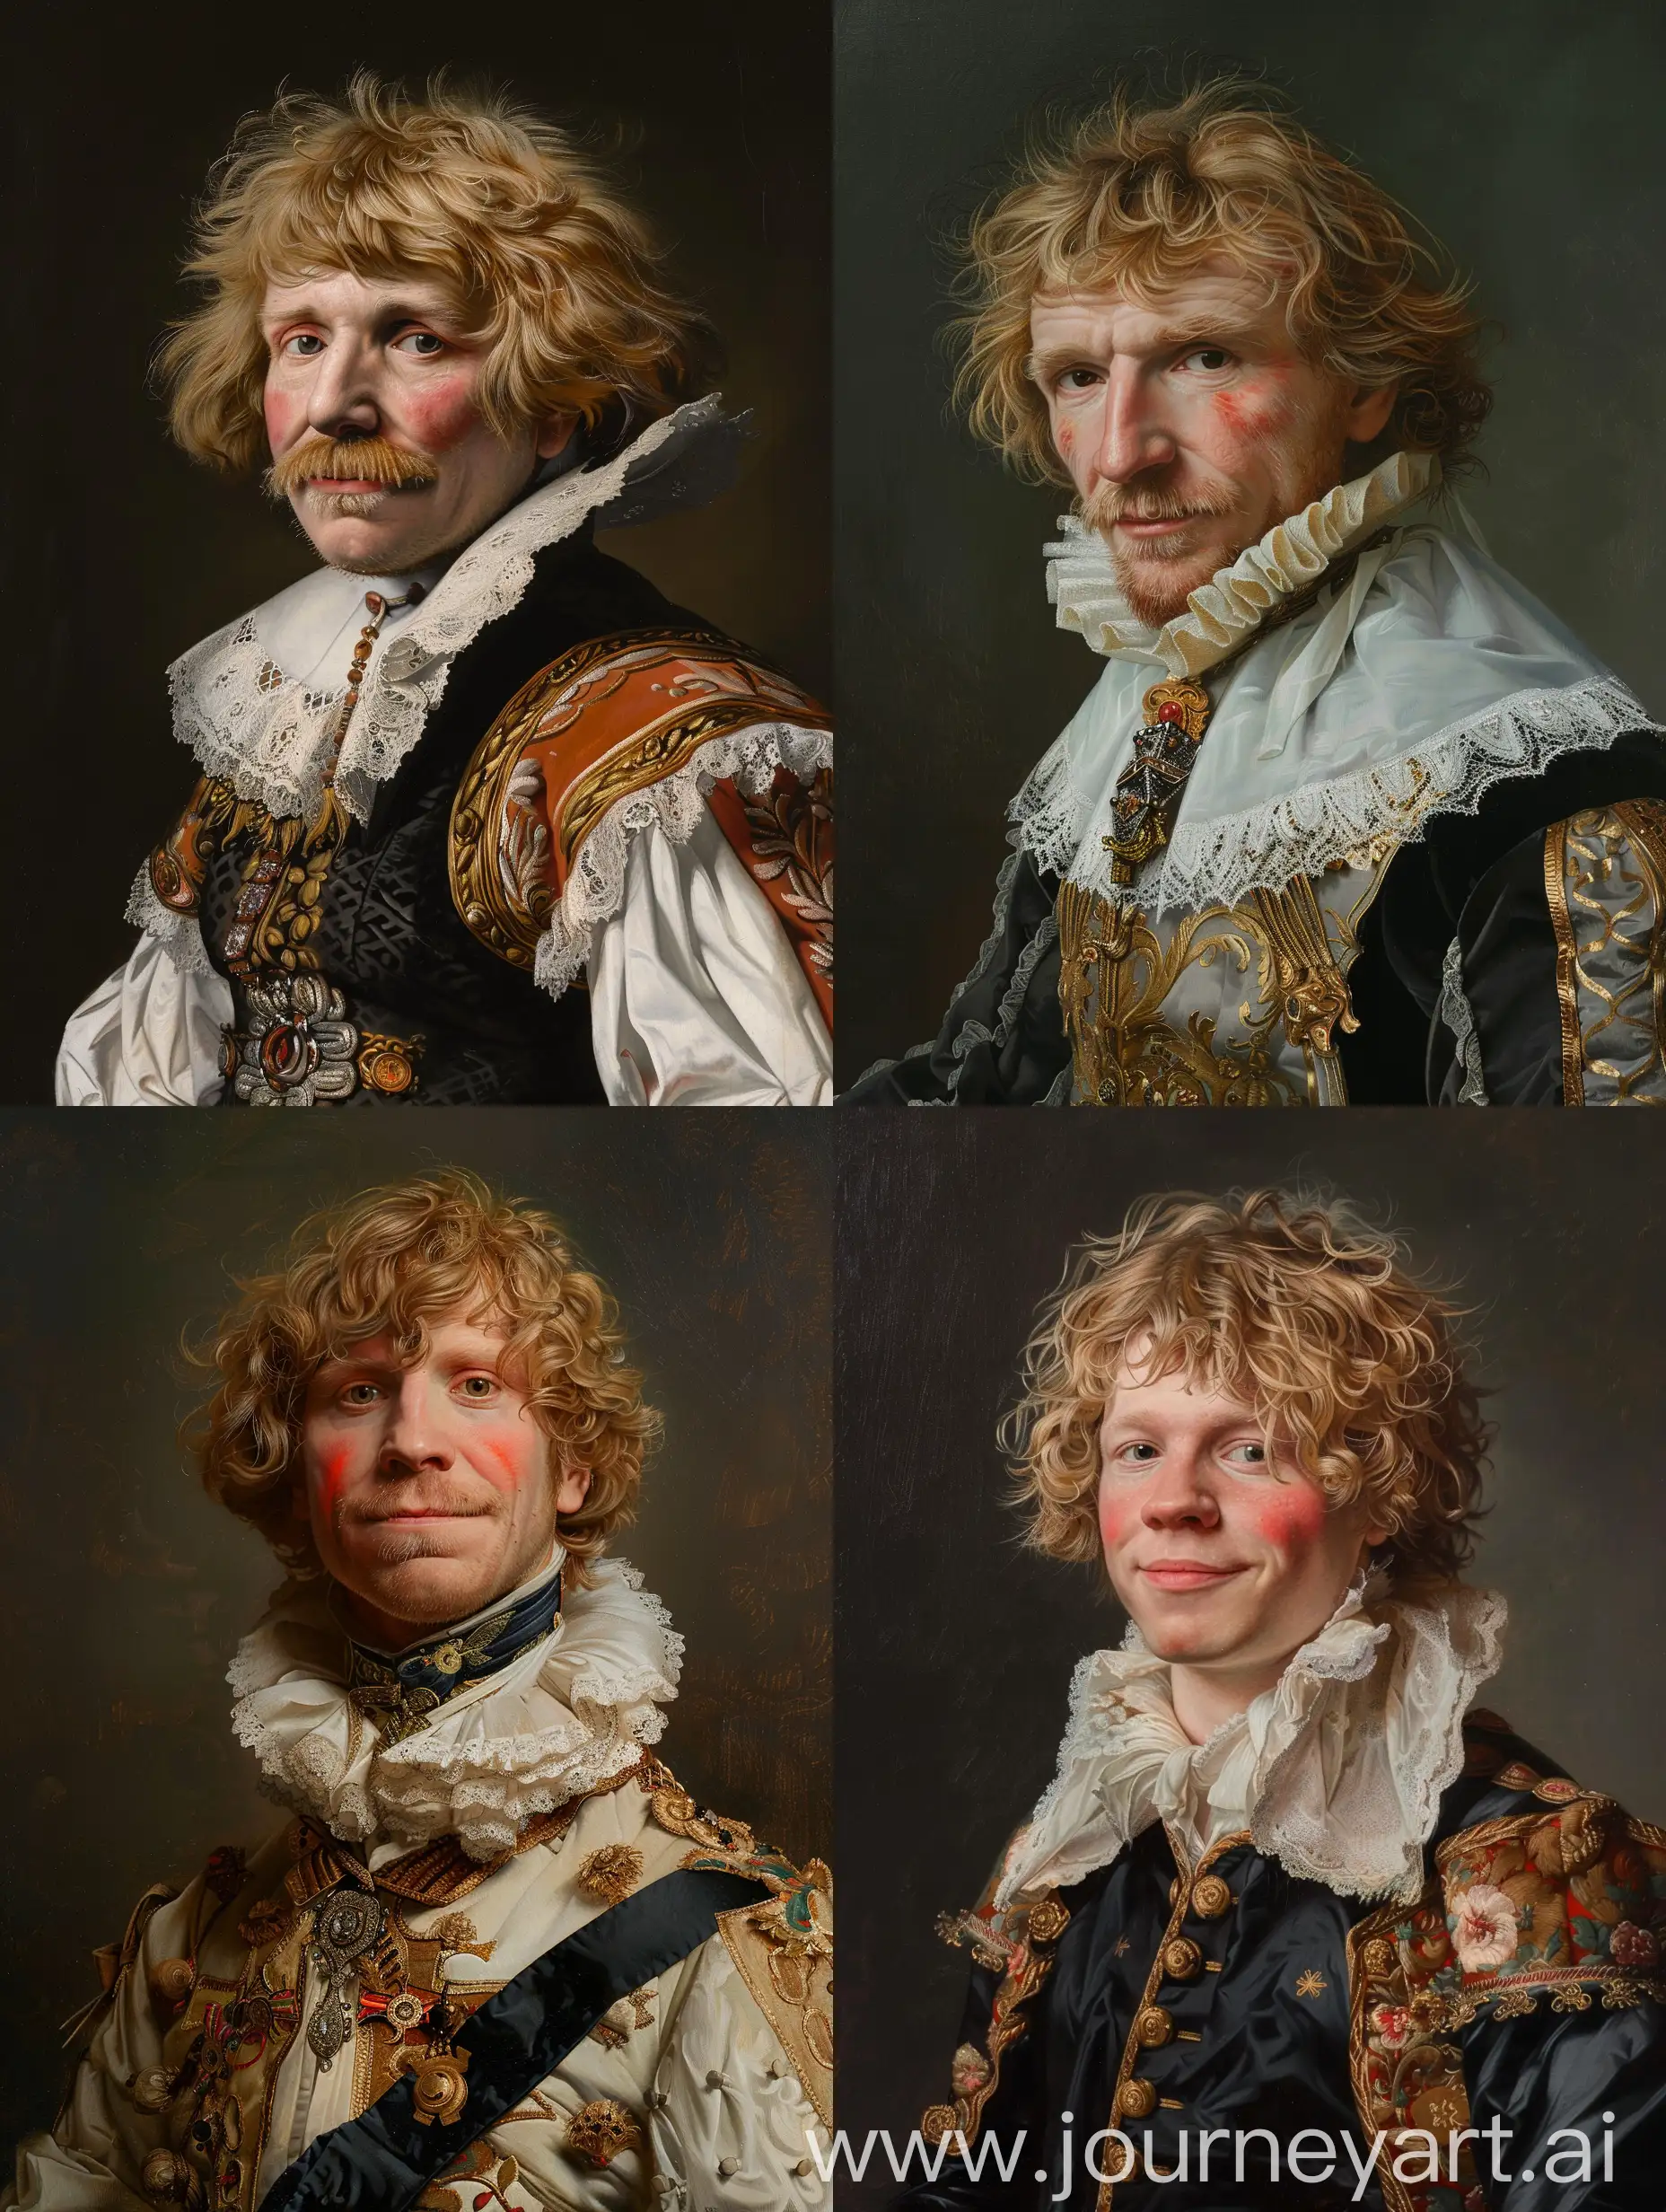 Noble-Czech-Man-Portrait-with-Shaggy-Blond-Hair-and-Red-Cheeks